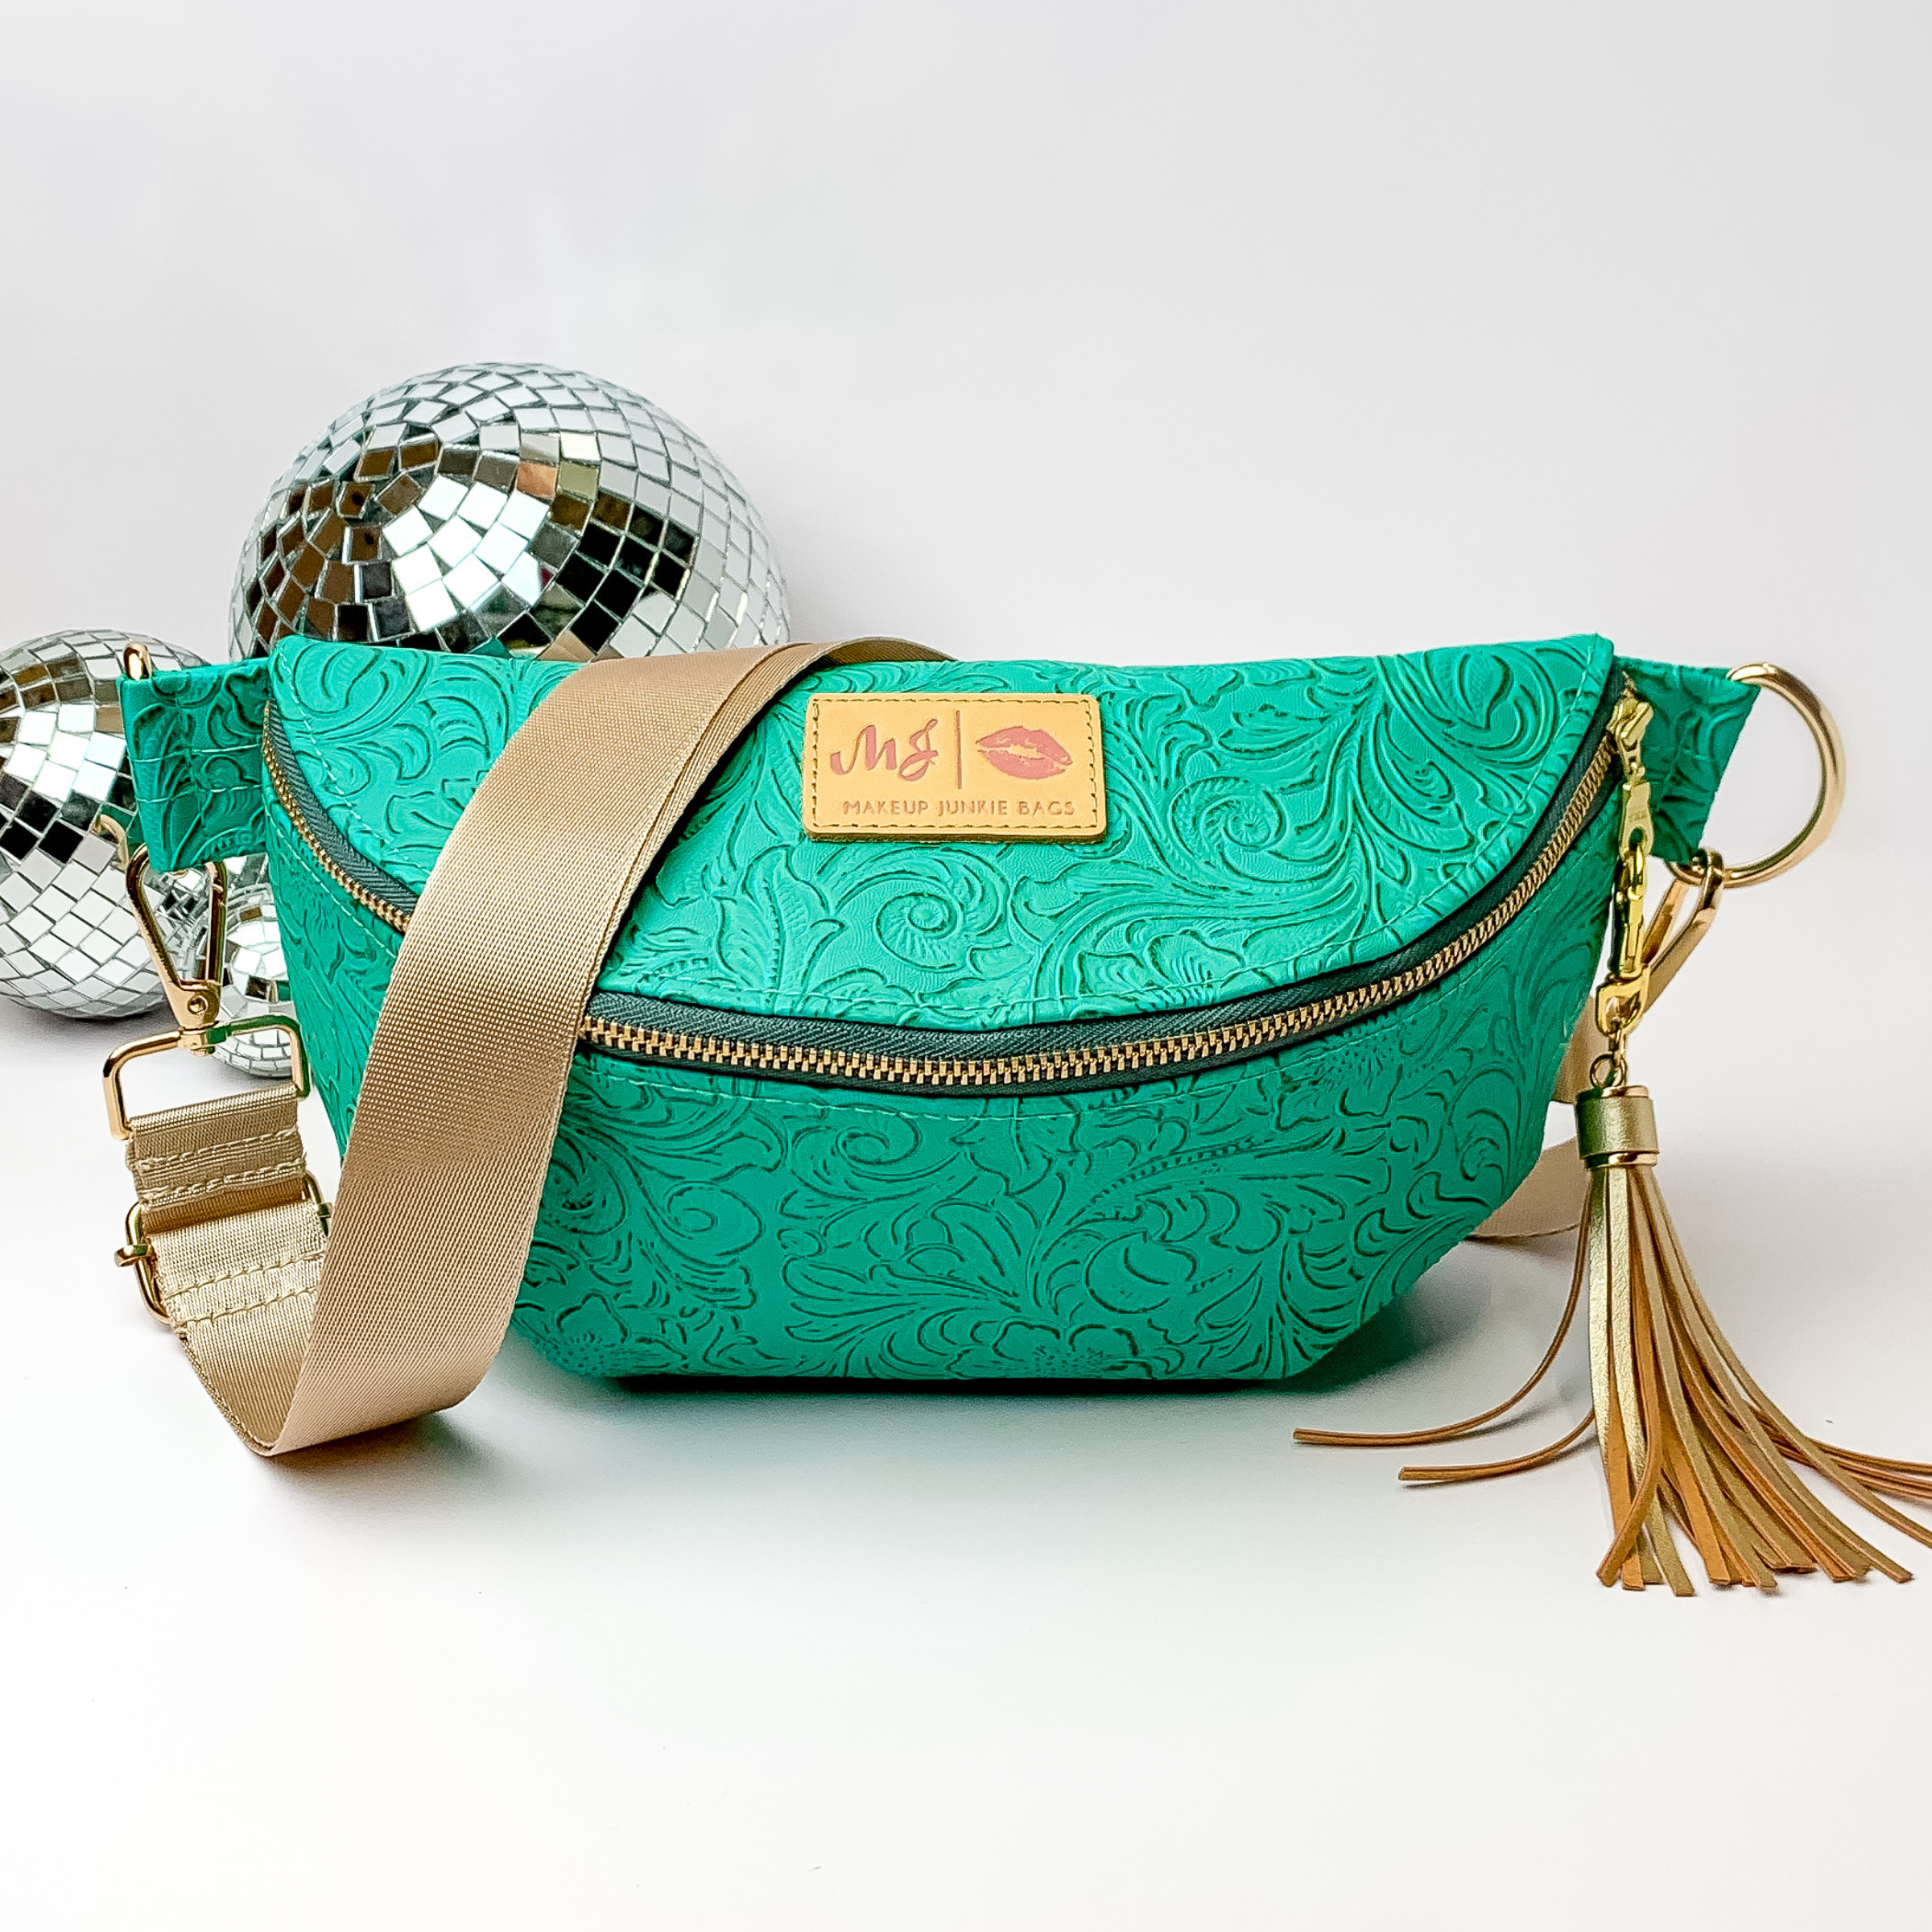 Turquoise, tooled print fanny pack with a black strap. This bag includes gold accents, a gold zipper, and a gold tassel. This bag also has a pink stitched logo for Makeup Junkie. This fanny pack is pictured on a white background in front of disco balls. 